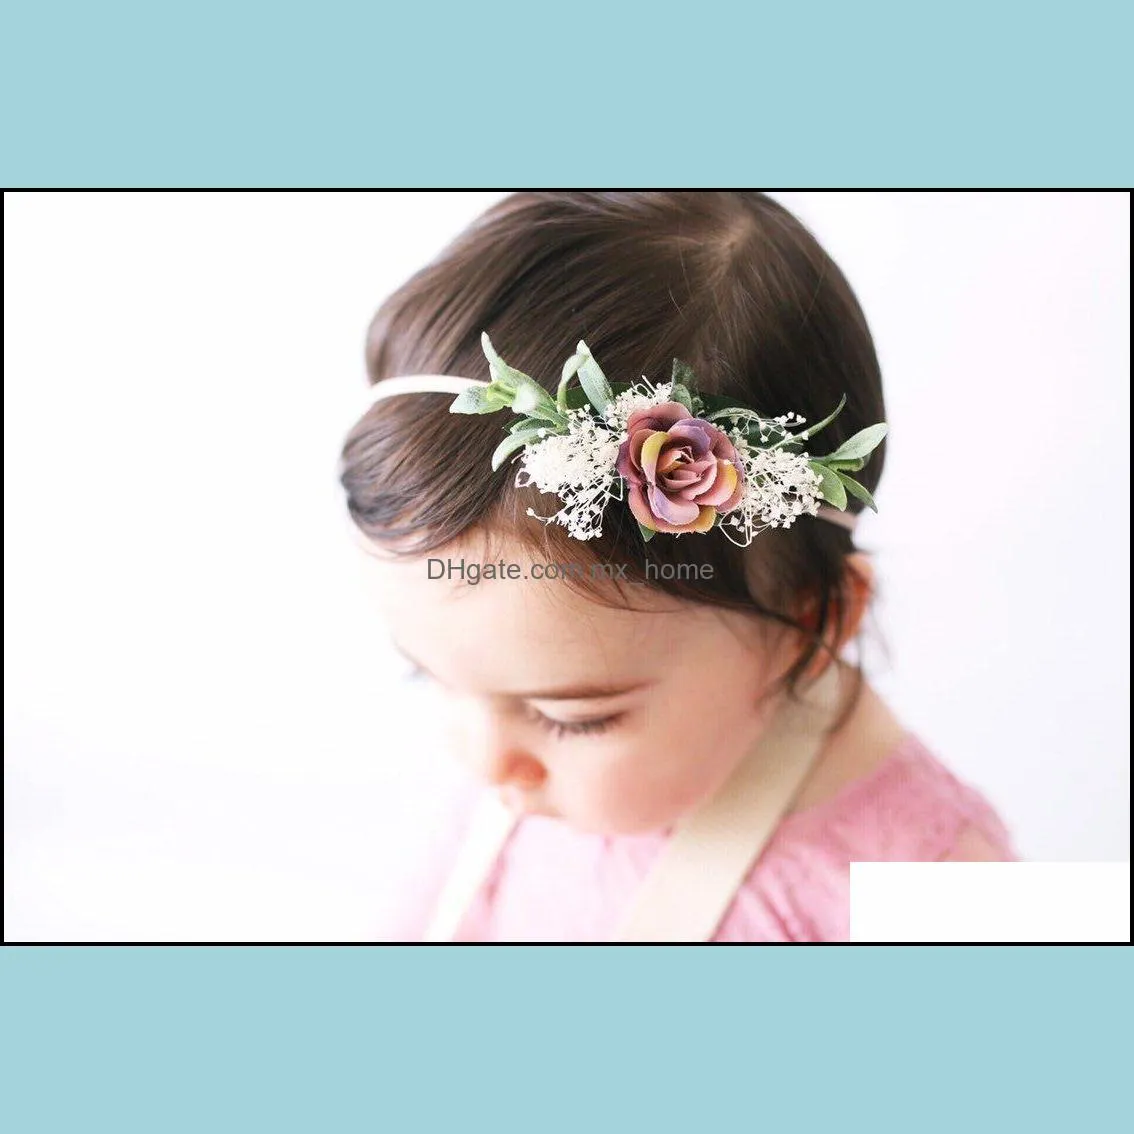 europe infant baby headband elastic flower crown baby flower crown photography props hair band hair accessory mxhome